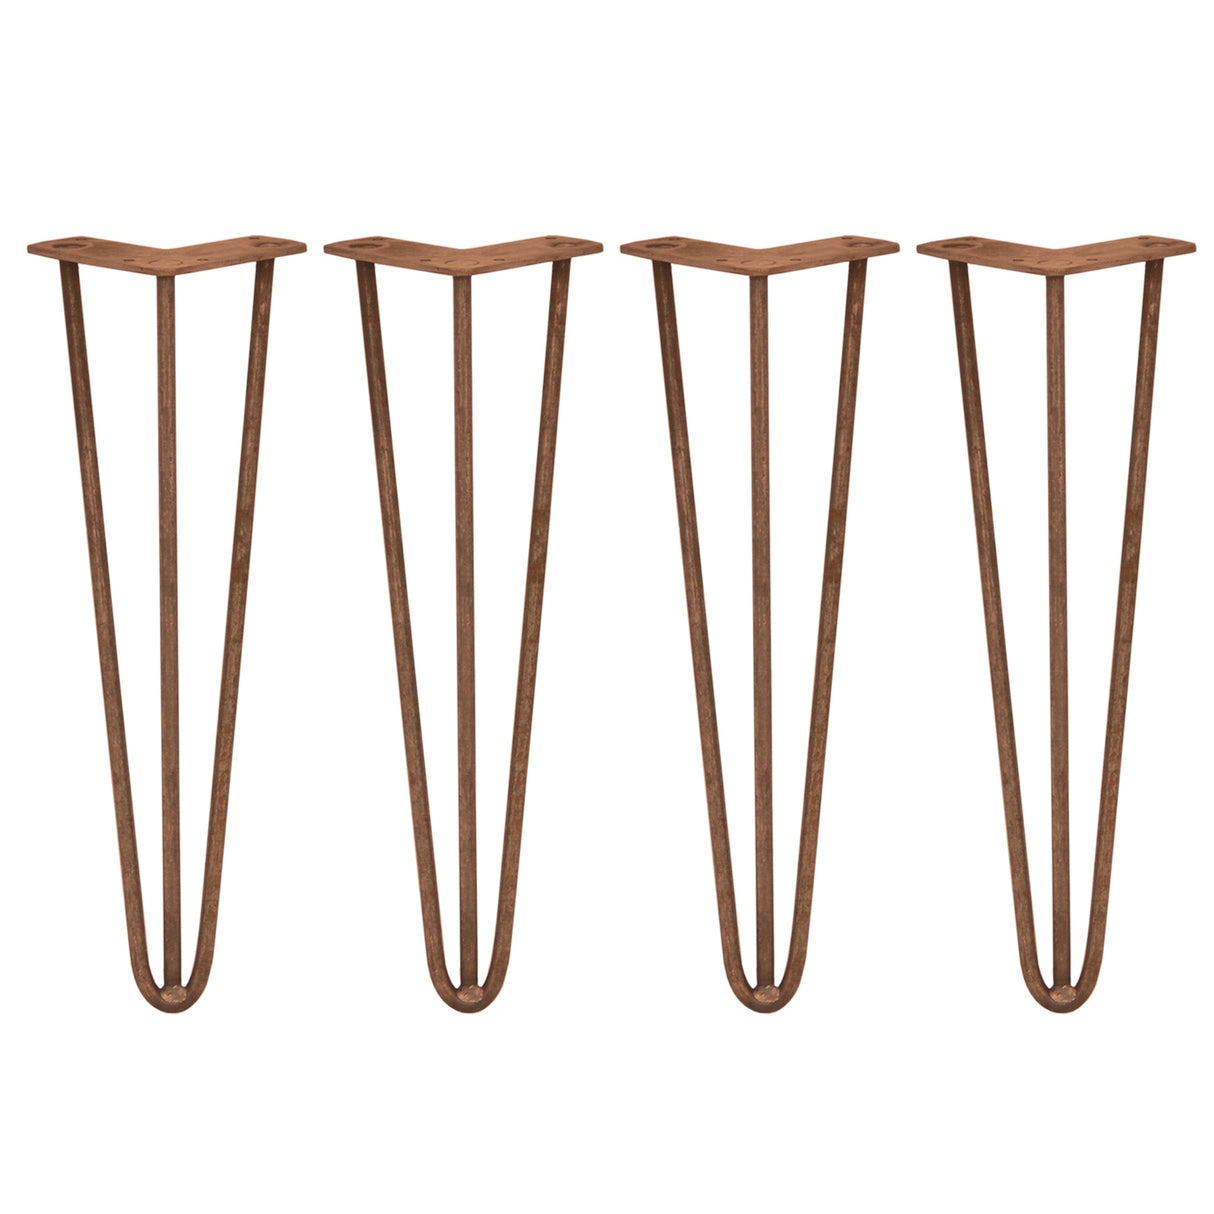 4 x 16" Hairpin Legs - 3 Prong - 12mm - Antique Copper